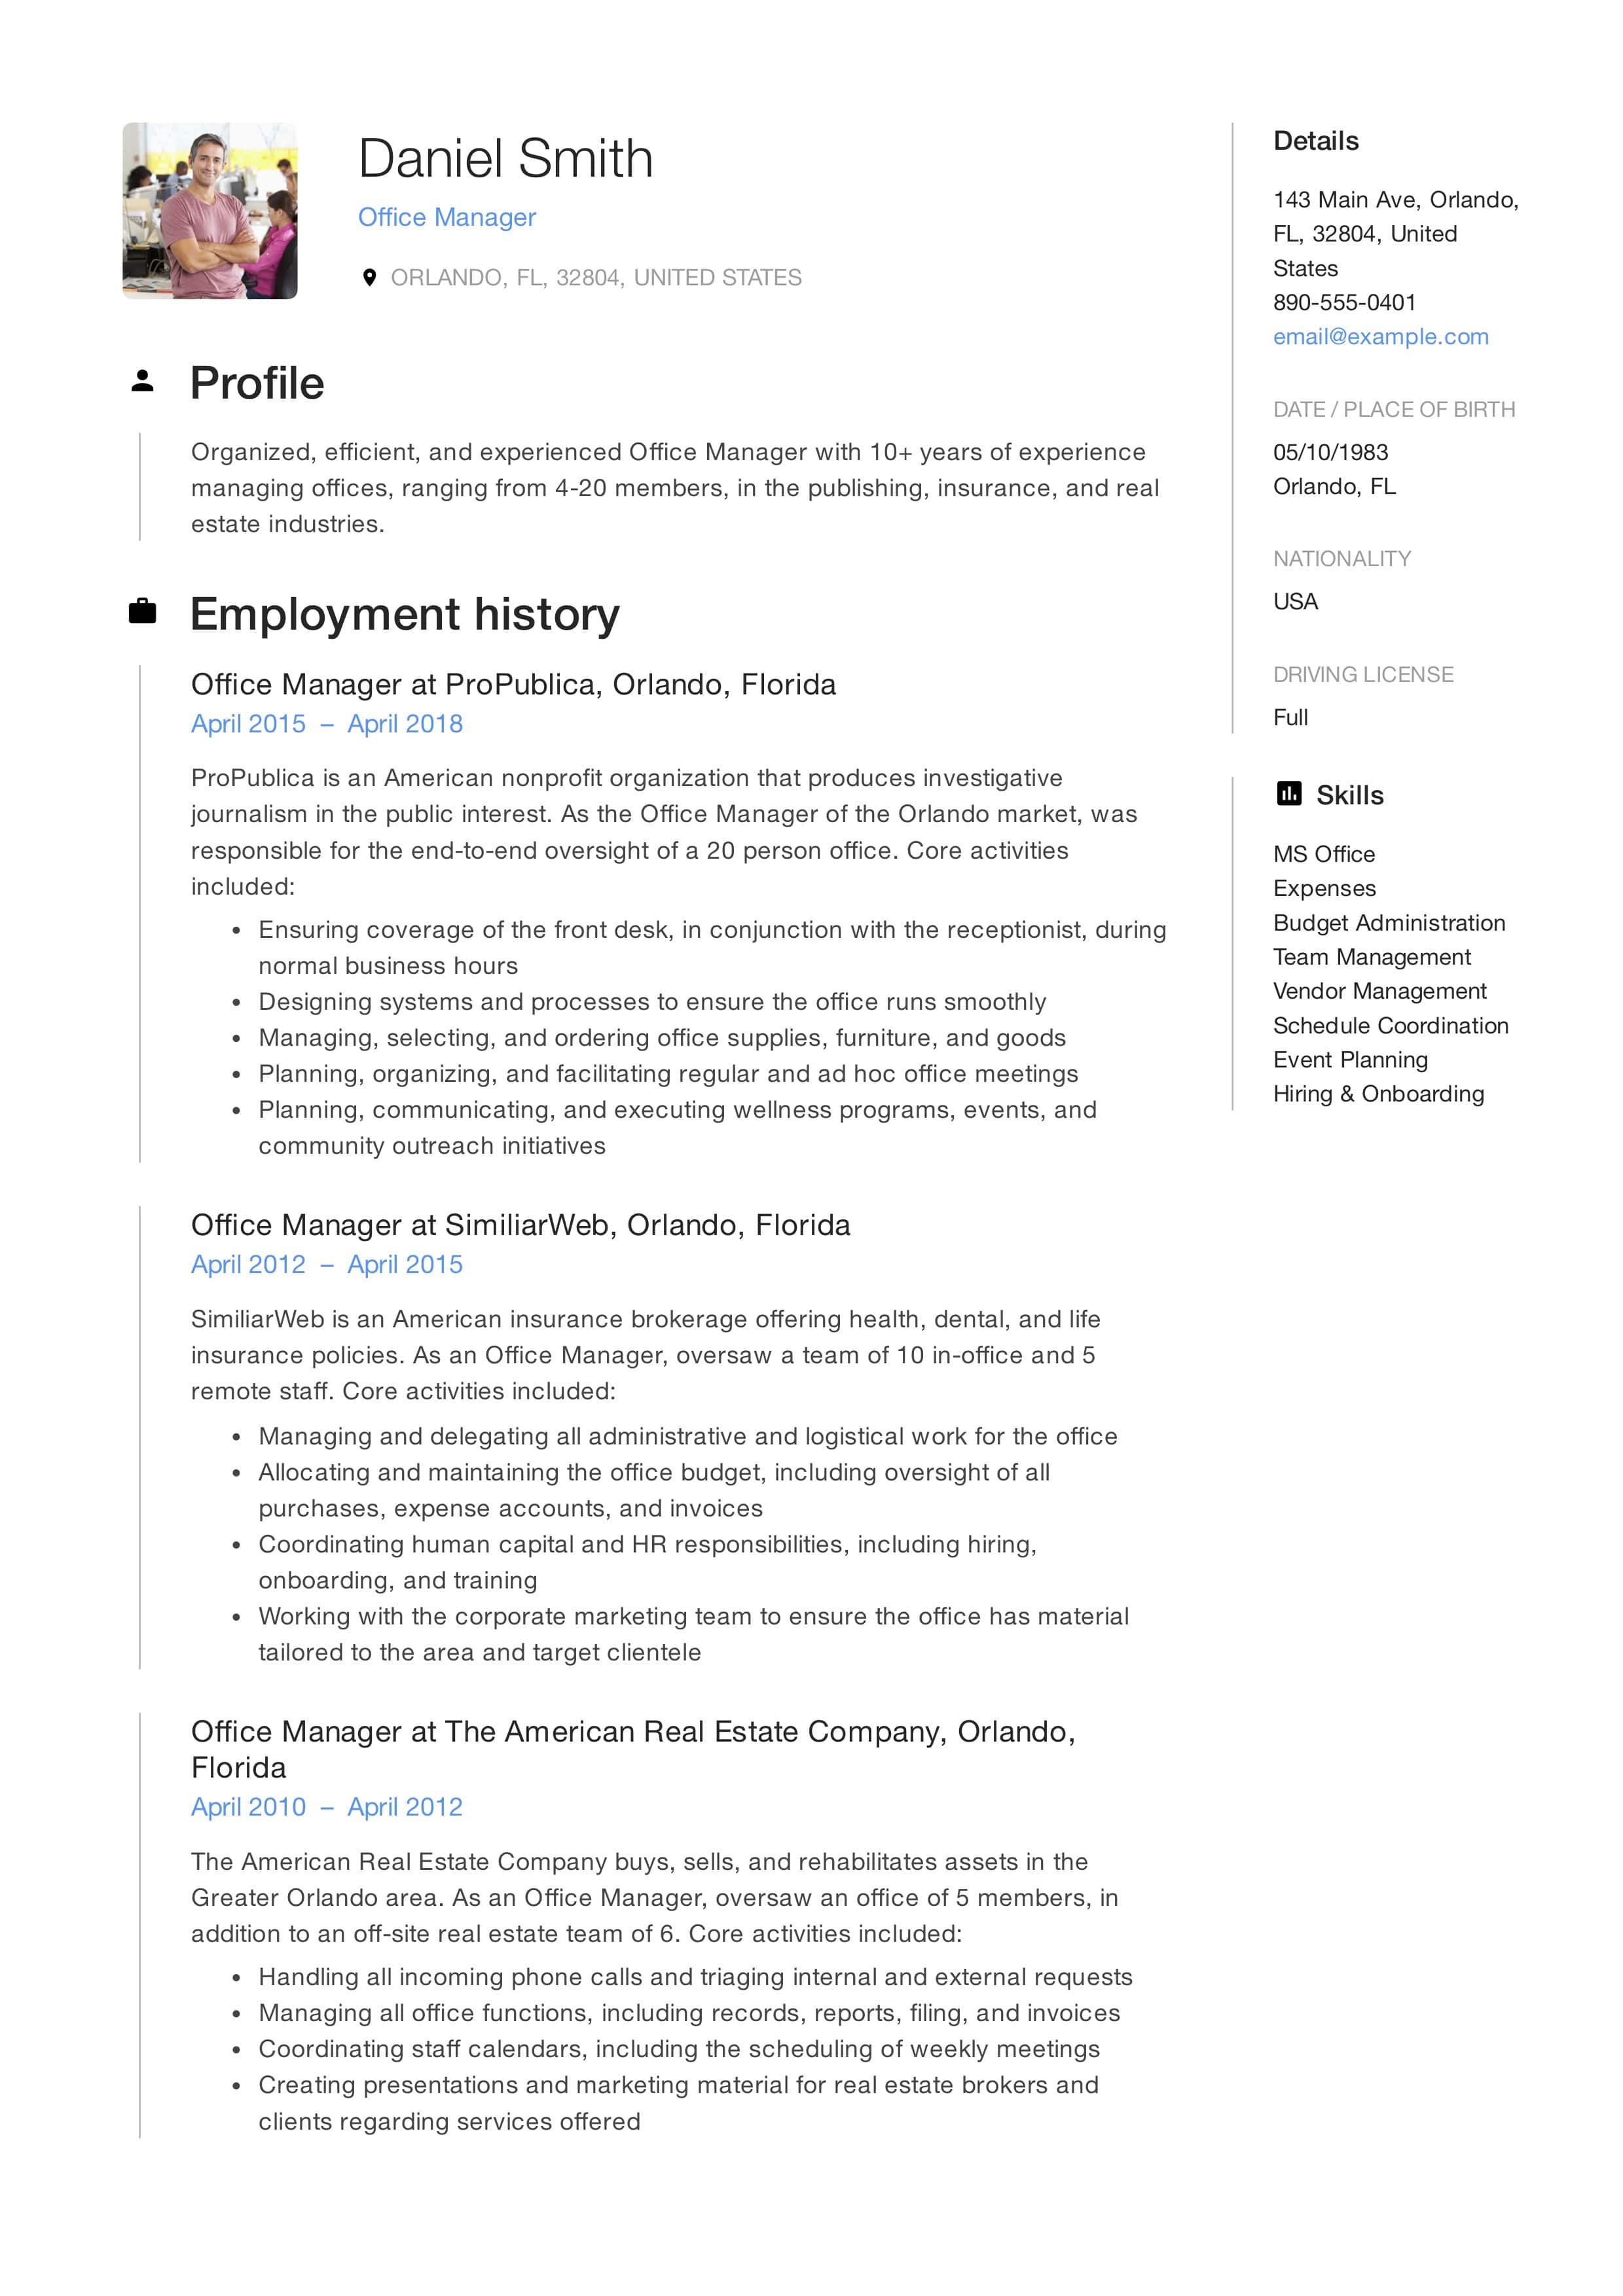 Resume Profile Examples Resume Sample Office Manager resume profile examples|wikiresume.com